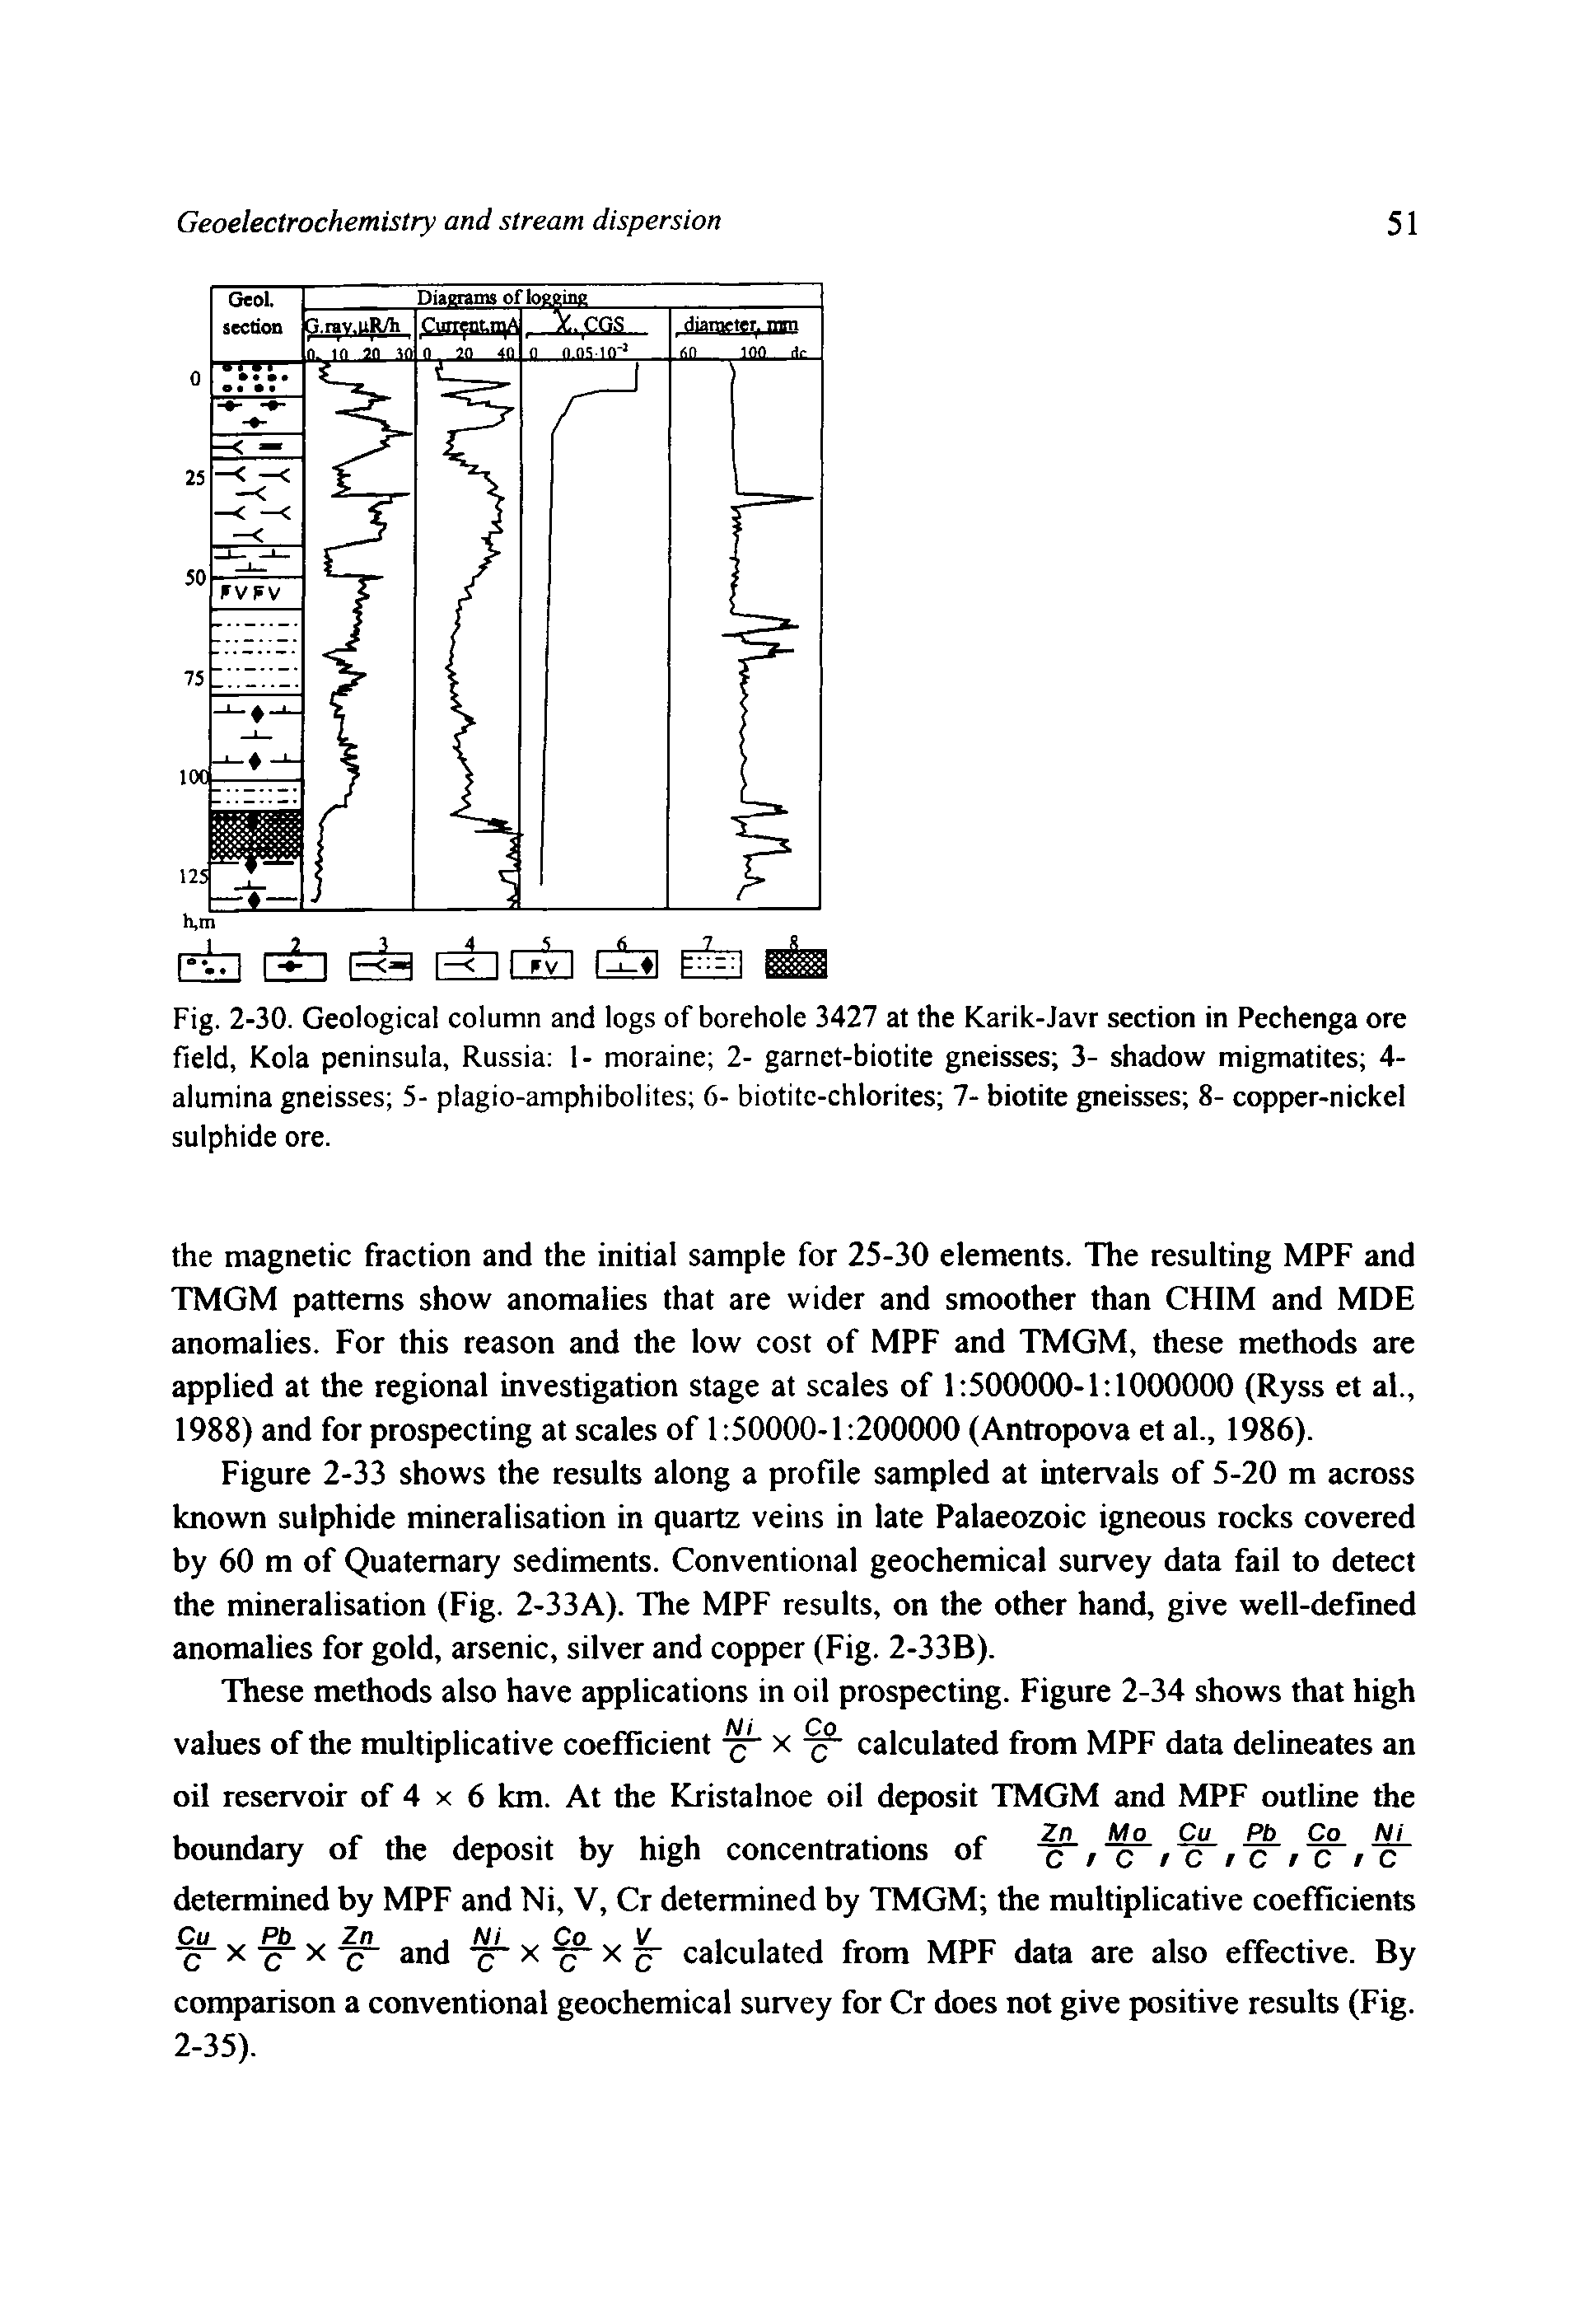 Figure 2-33 shows the results along a profile sampled at intervals of 5-20 m across known sulphide mineralisation in quartz veins in late Palaeozoic igneous rocks covered by 60 m of Quaternary sediments. Conventional geochemical survey data fail to detect the mineralisation (Fig. 2-33A). The MPF results, on the other hand, give well-defined anomalies for gold, arsenic, silver and copper (Fig. 2-33B).